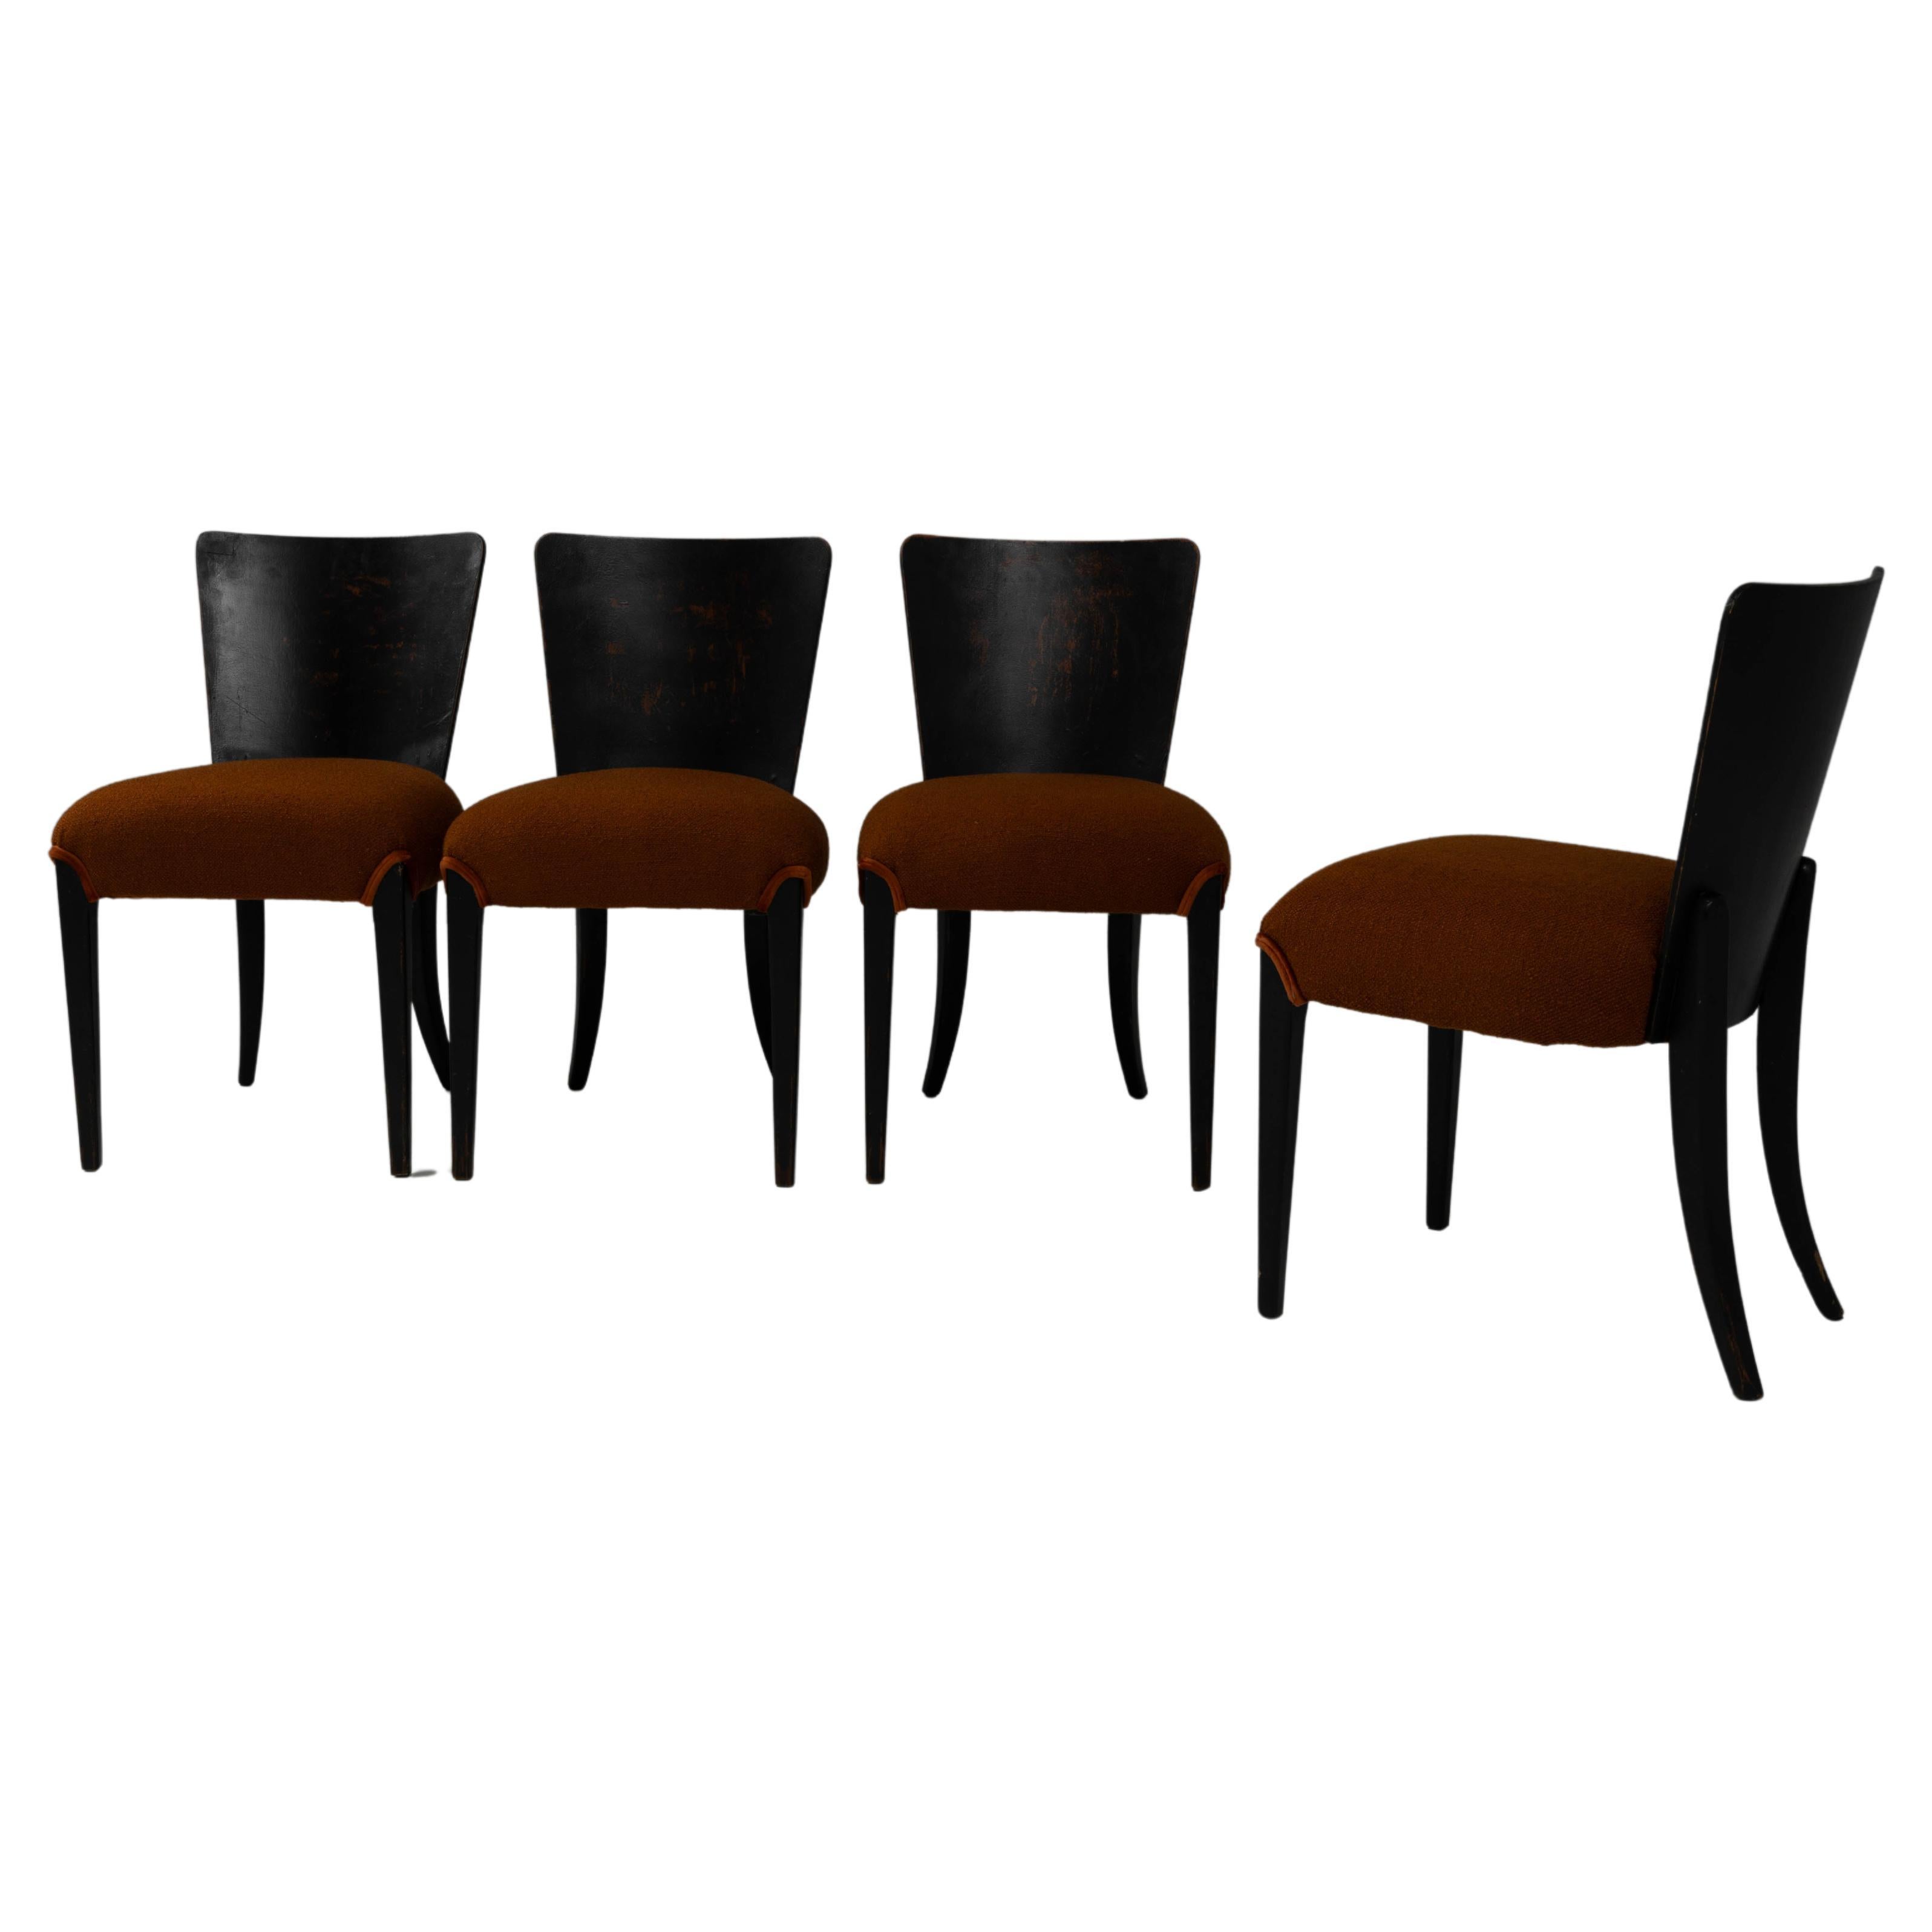 20th Century Czech Wooden Dining Chairs With Upholstered Seats By J. Halabala For Sale